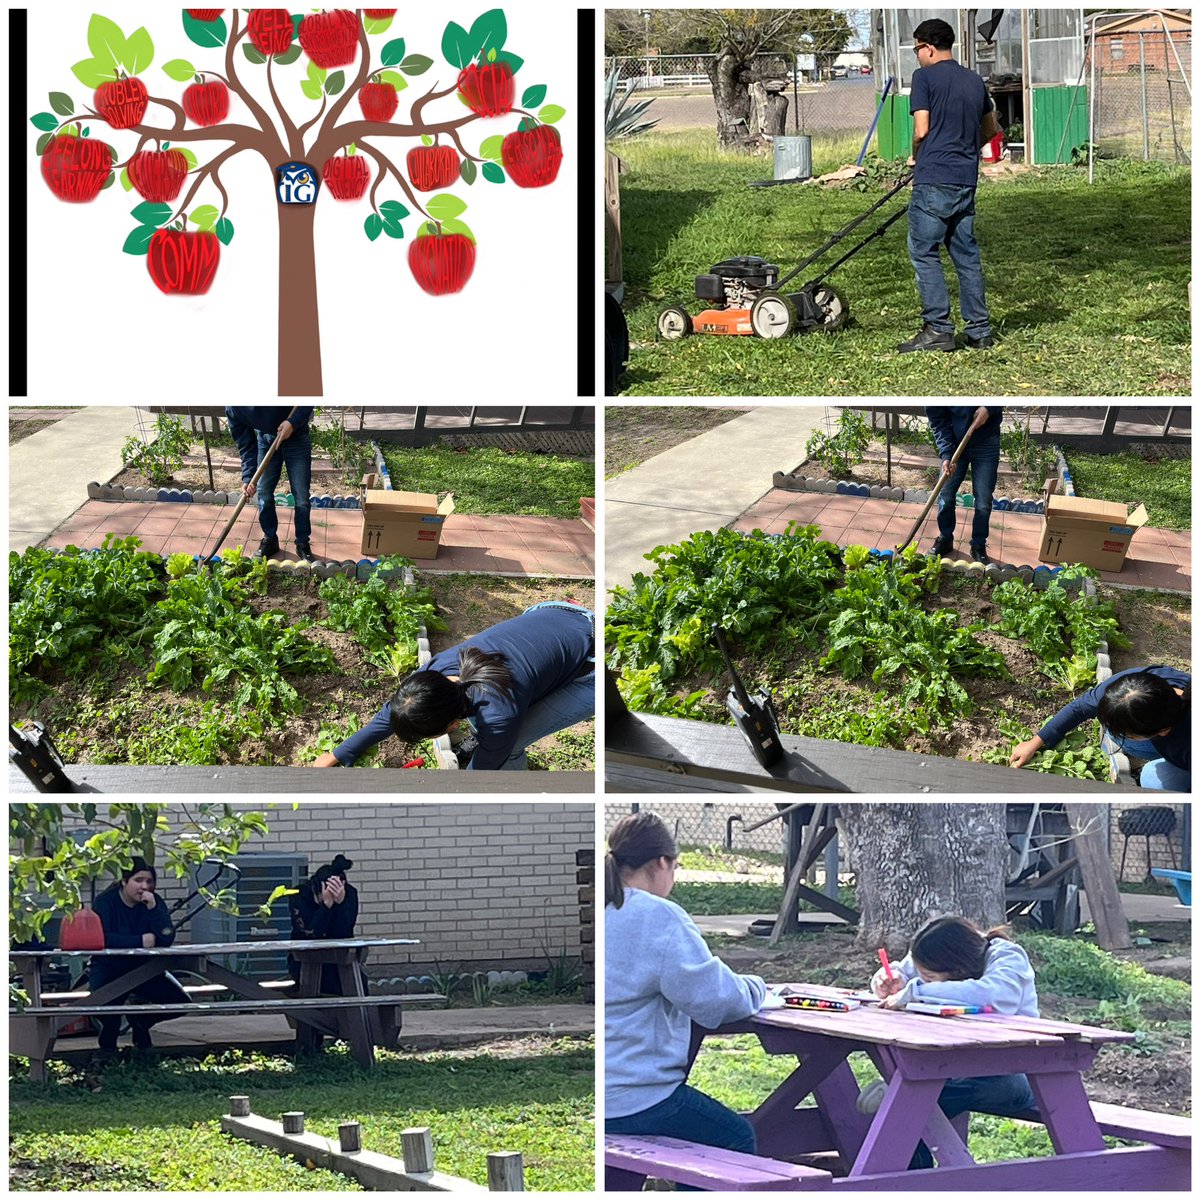 @IandGCenter #Students taking a break from the traditional classroom to create, beautify and protect our #OutdoorClassroom . #Together we create our  own #LearningSpaces where our #SelfEsteem takes off @SpaceX @usedgov @McAllenISD @McAllenISDCTE #StudentLegacy